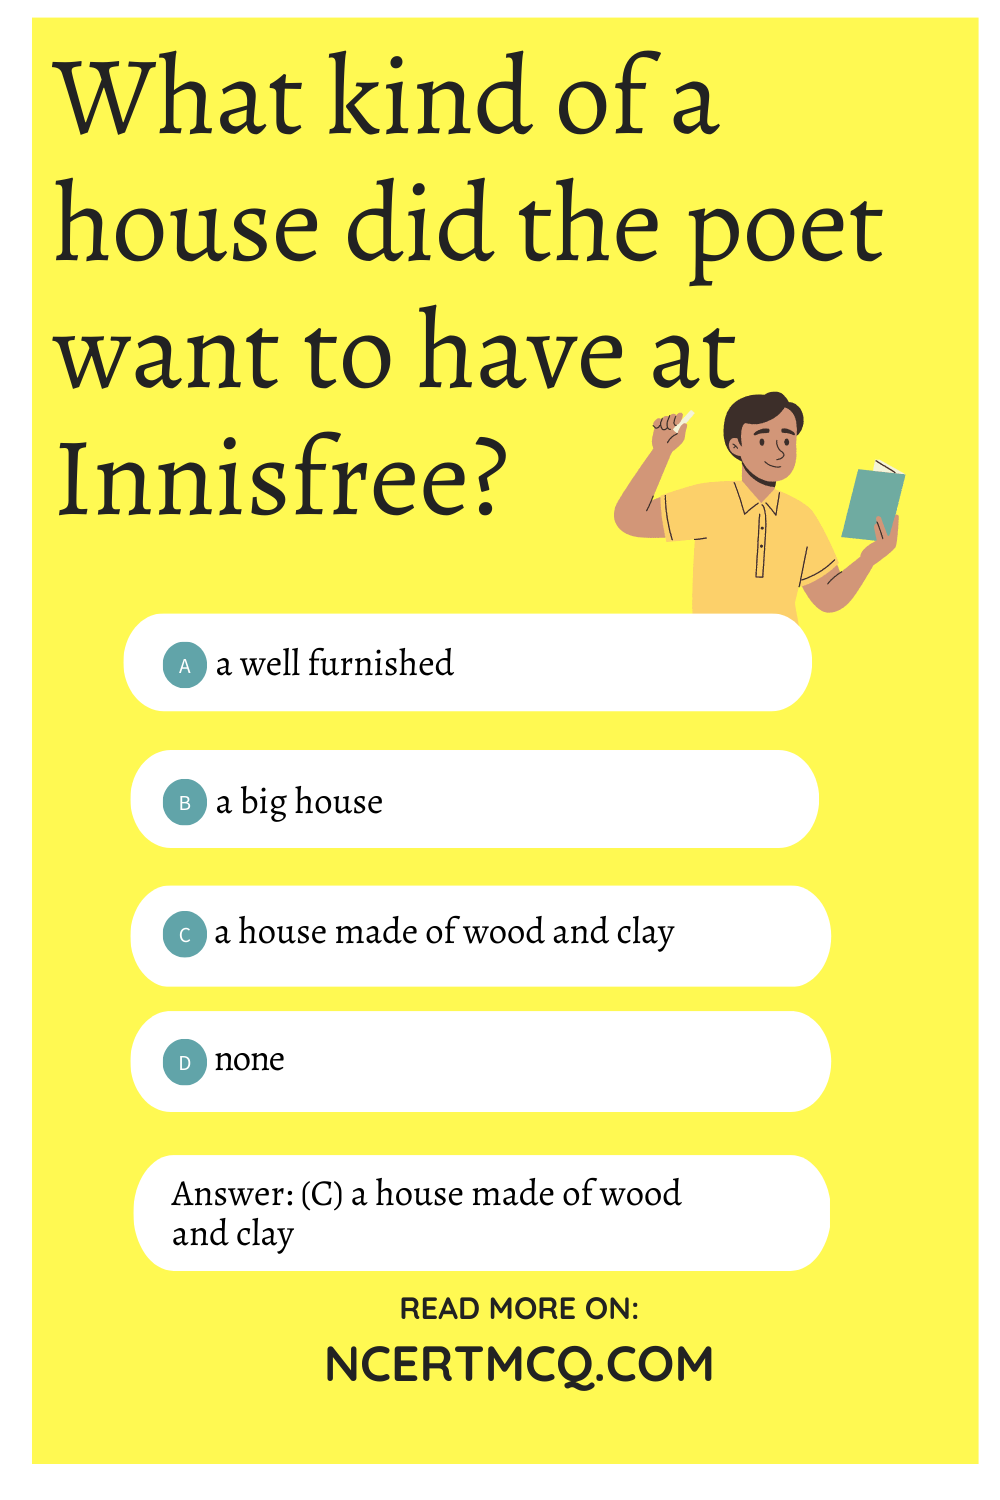 What kind of a house did the poet want to have at Innisfree?